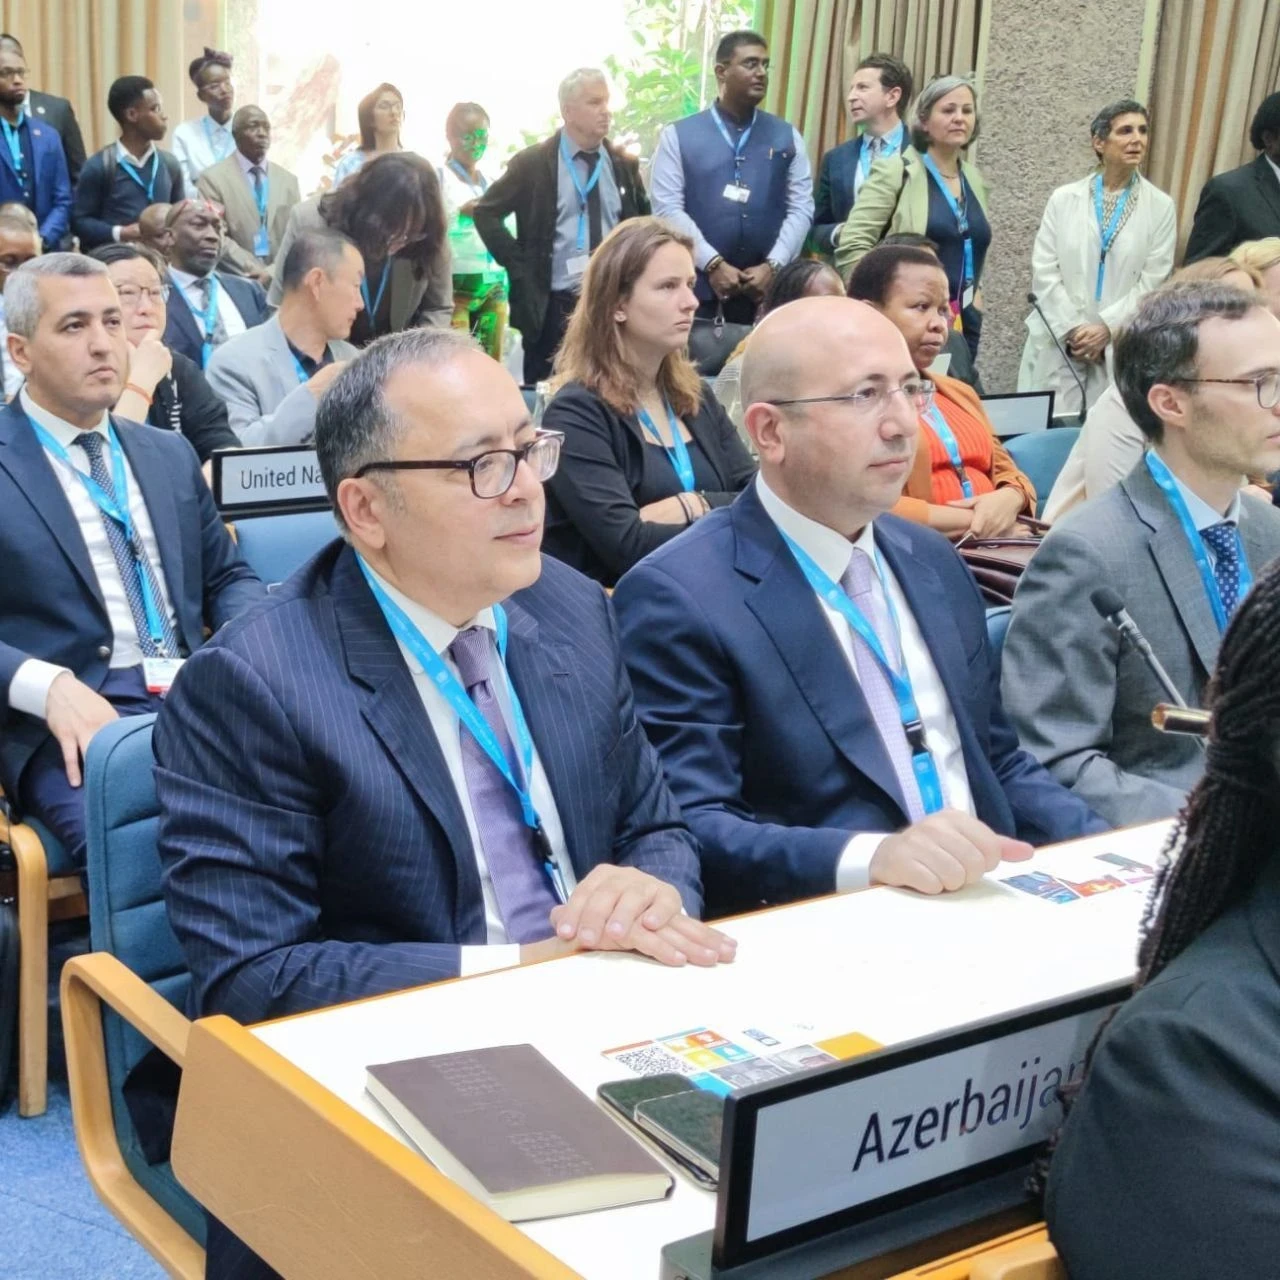 The delegation of the Republic of Azerbaijan attends the 2nd session of the UN Habitat Assembly